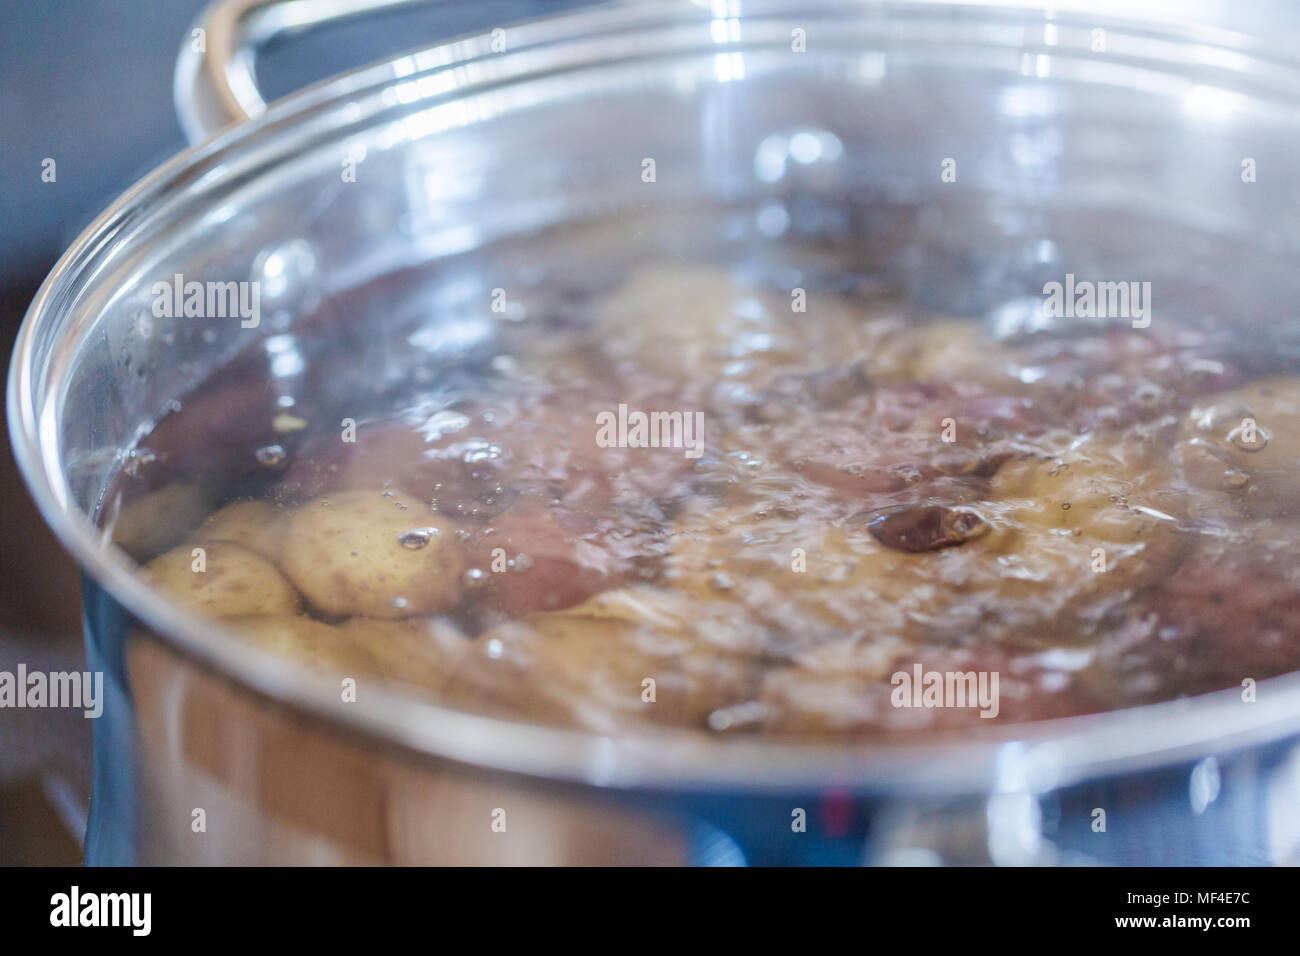 https://c8.alamy.com/comp/MF4E7C/boiling-little-gold-and-red-potatoes-in-large-cooking-pot-MF4E7C.jpg